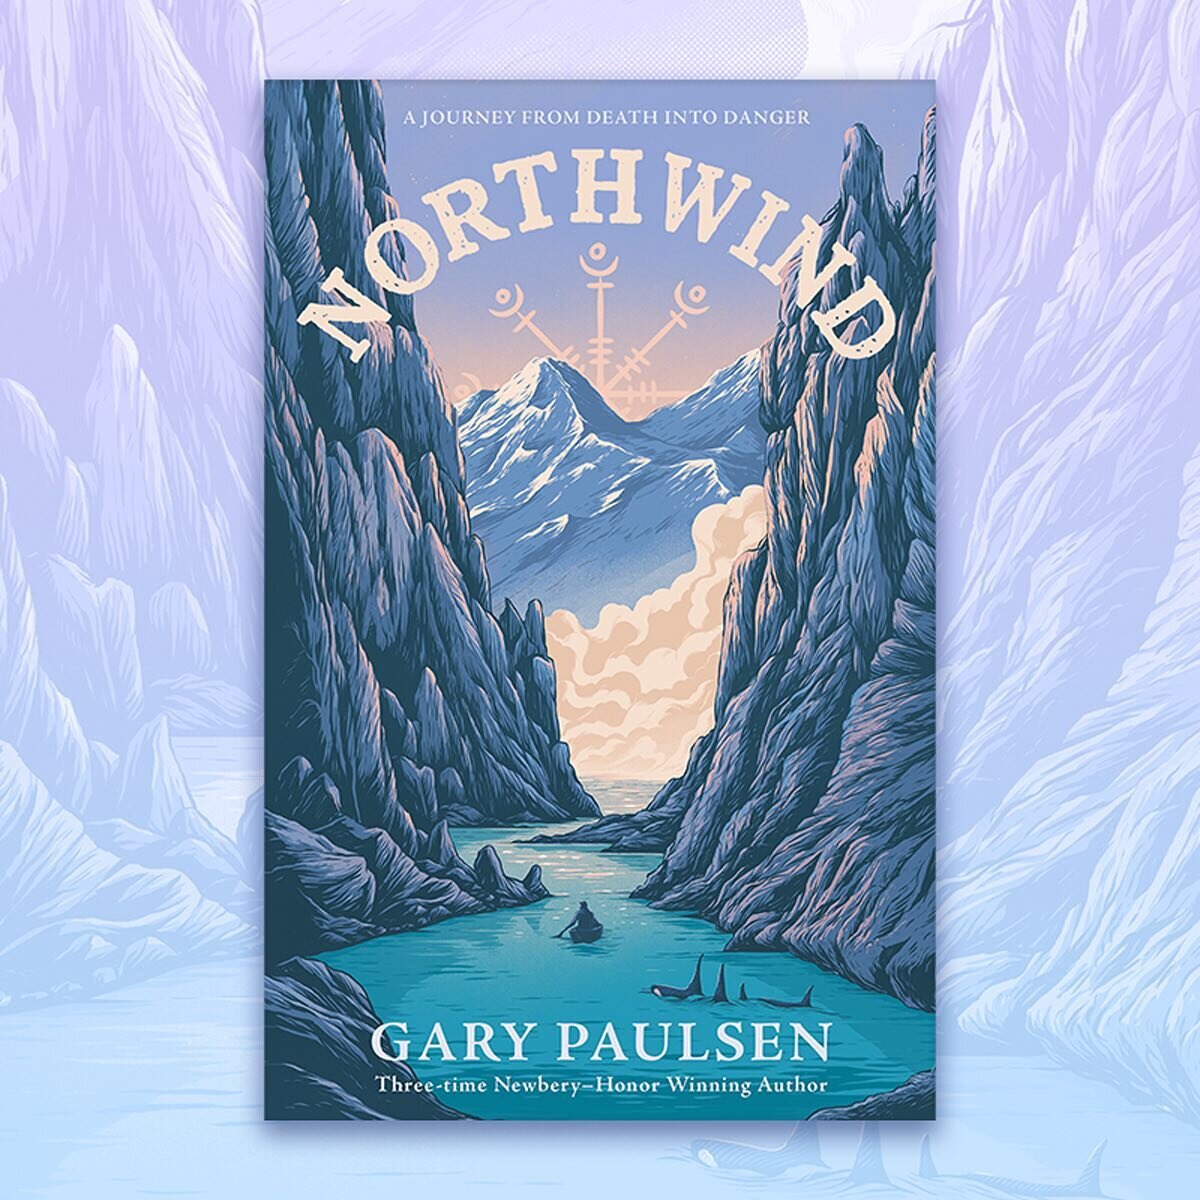 A bittersweet Pub Day for a book I am absolutely honored to have worked on, the last written by the late great Gary Paulsen. 

Enormous thanks to Joe Wilson for his stunning illustrations. You truly captured the majesty of this wilderness story! 

Il